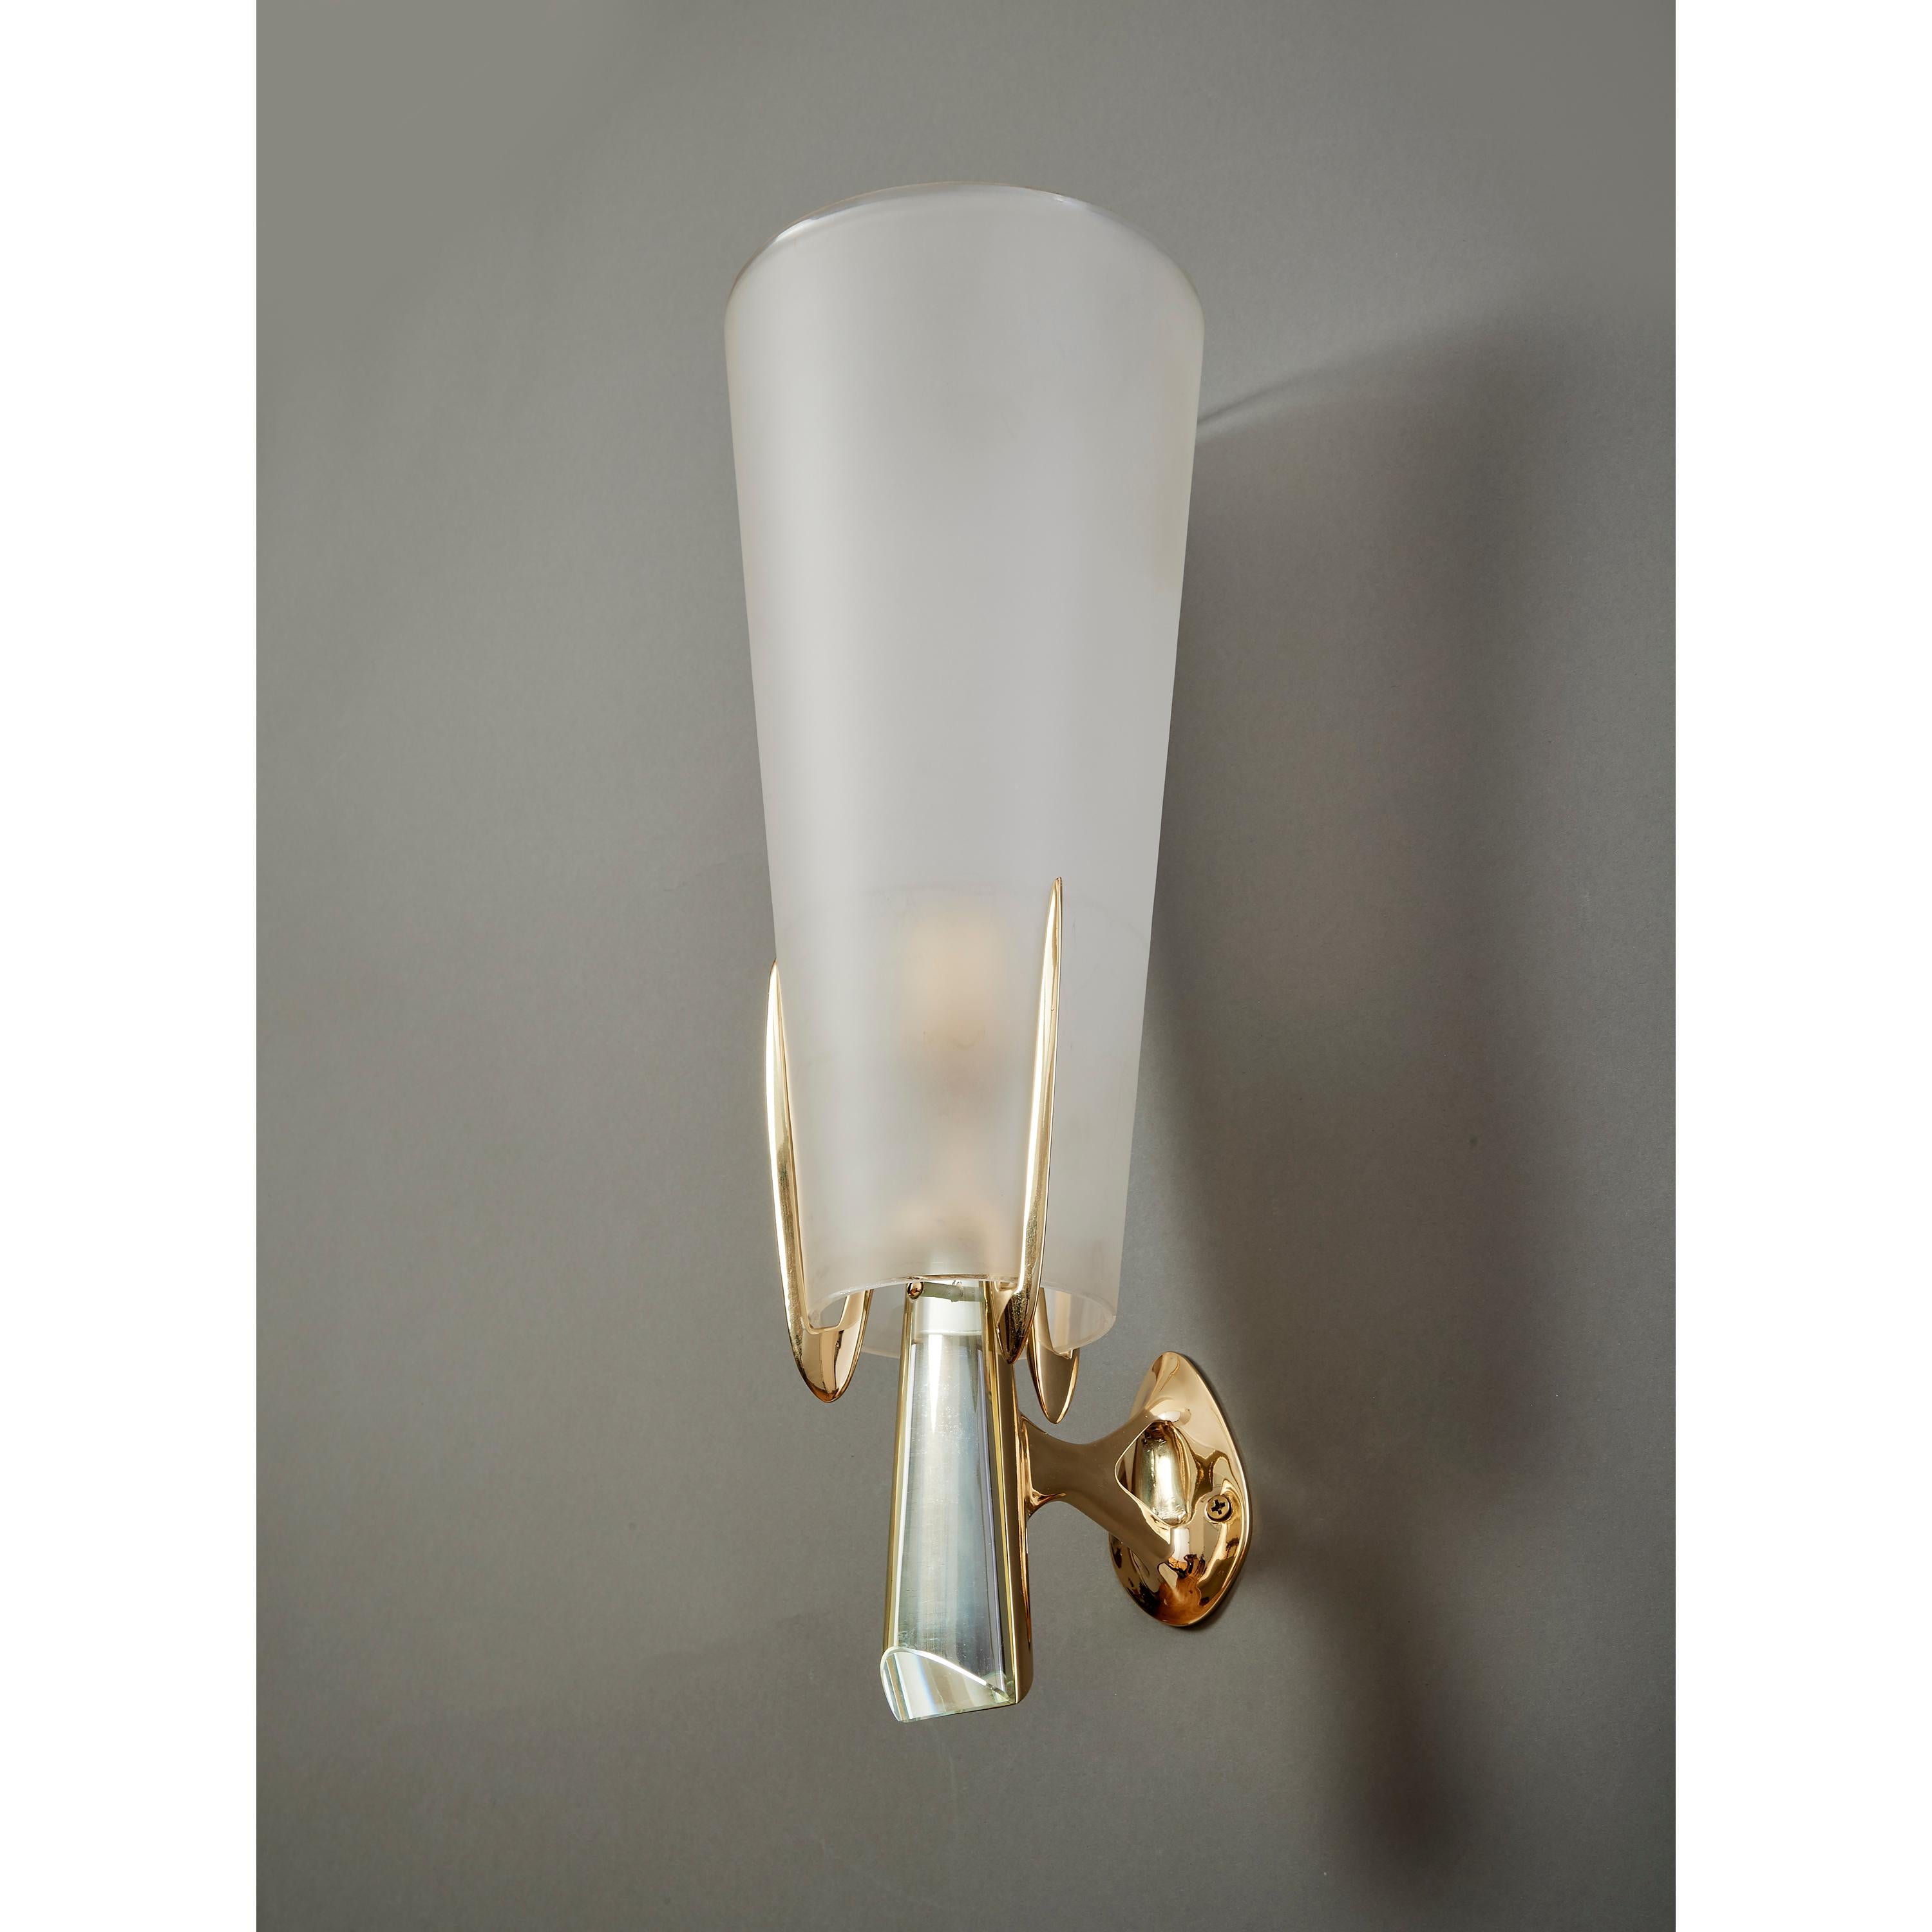 Max Ingrand for Fontana Arte: Rare Sconces in Brass and Crystal, Italy 1955 For Sale 4